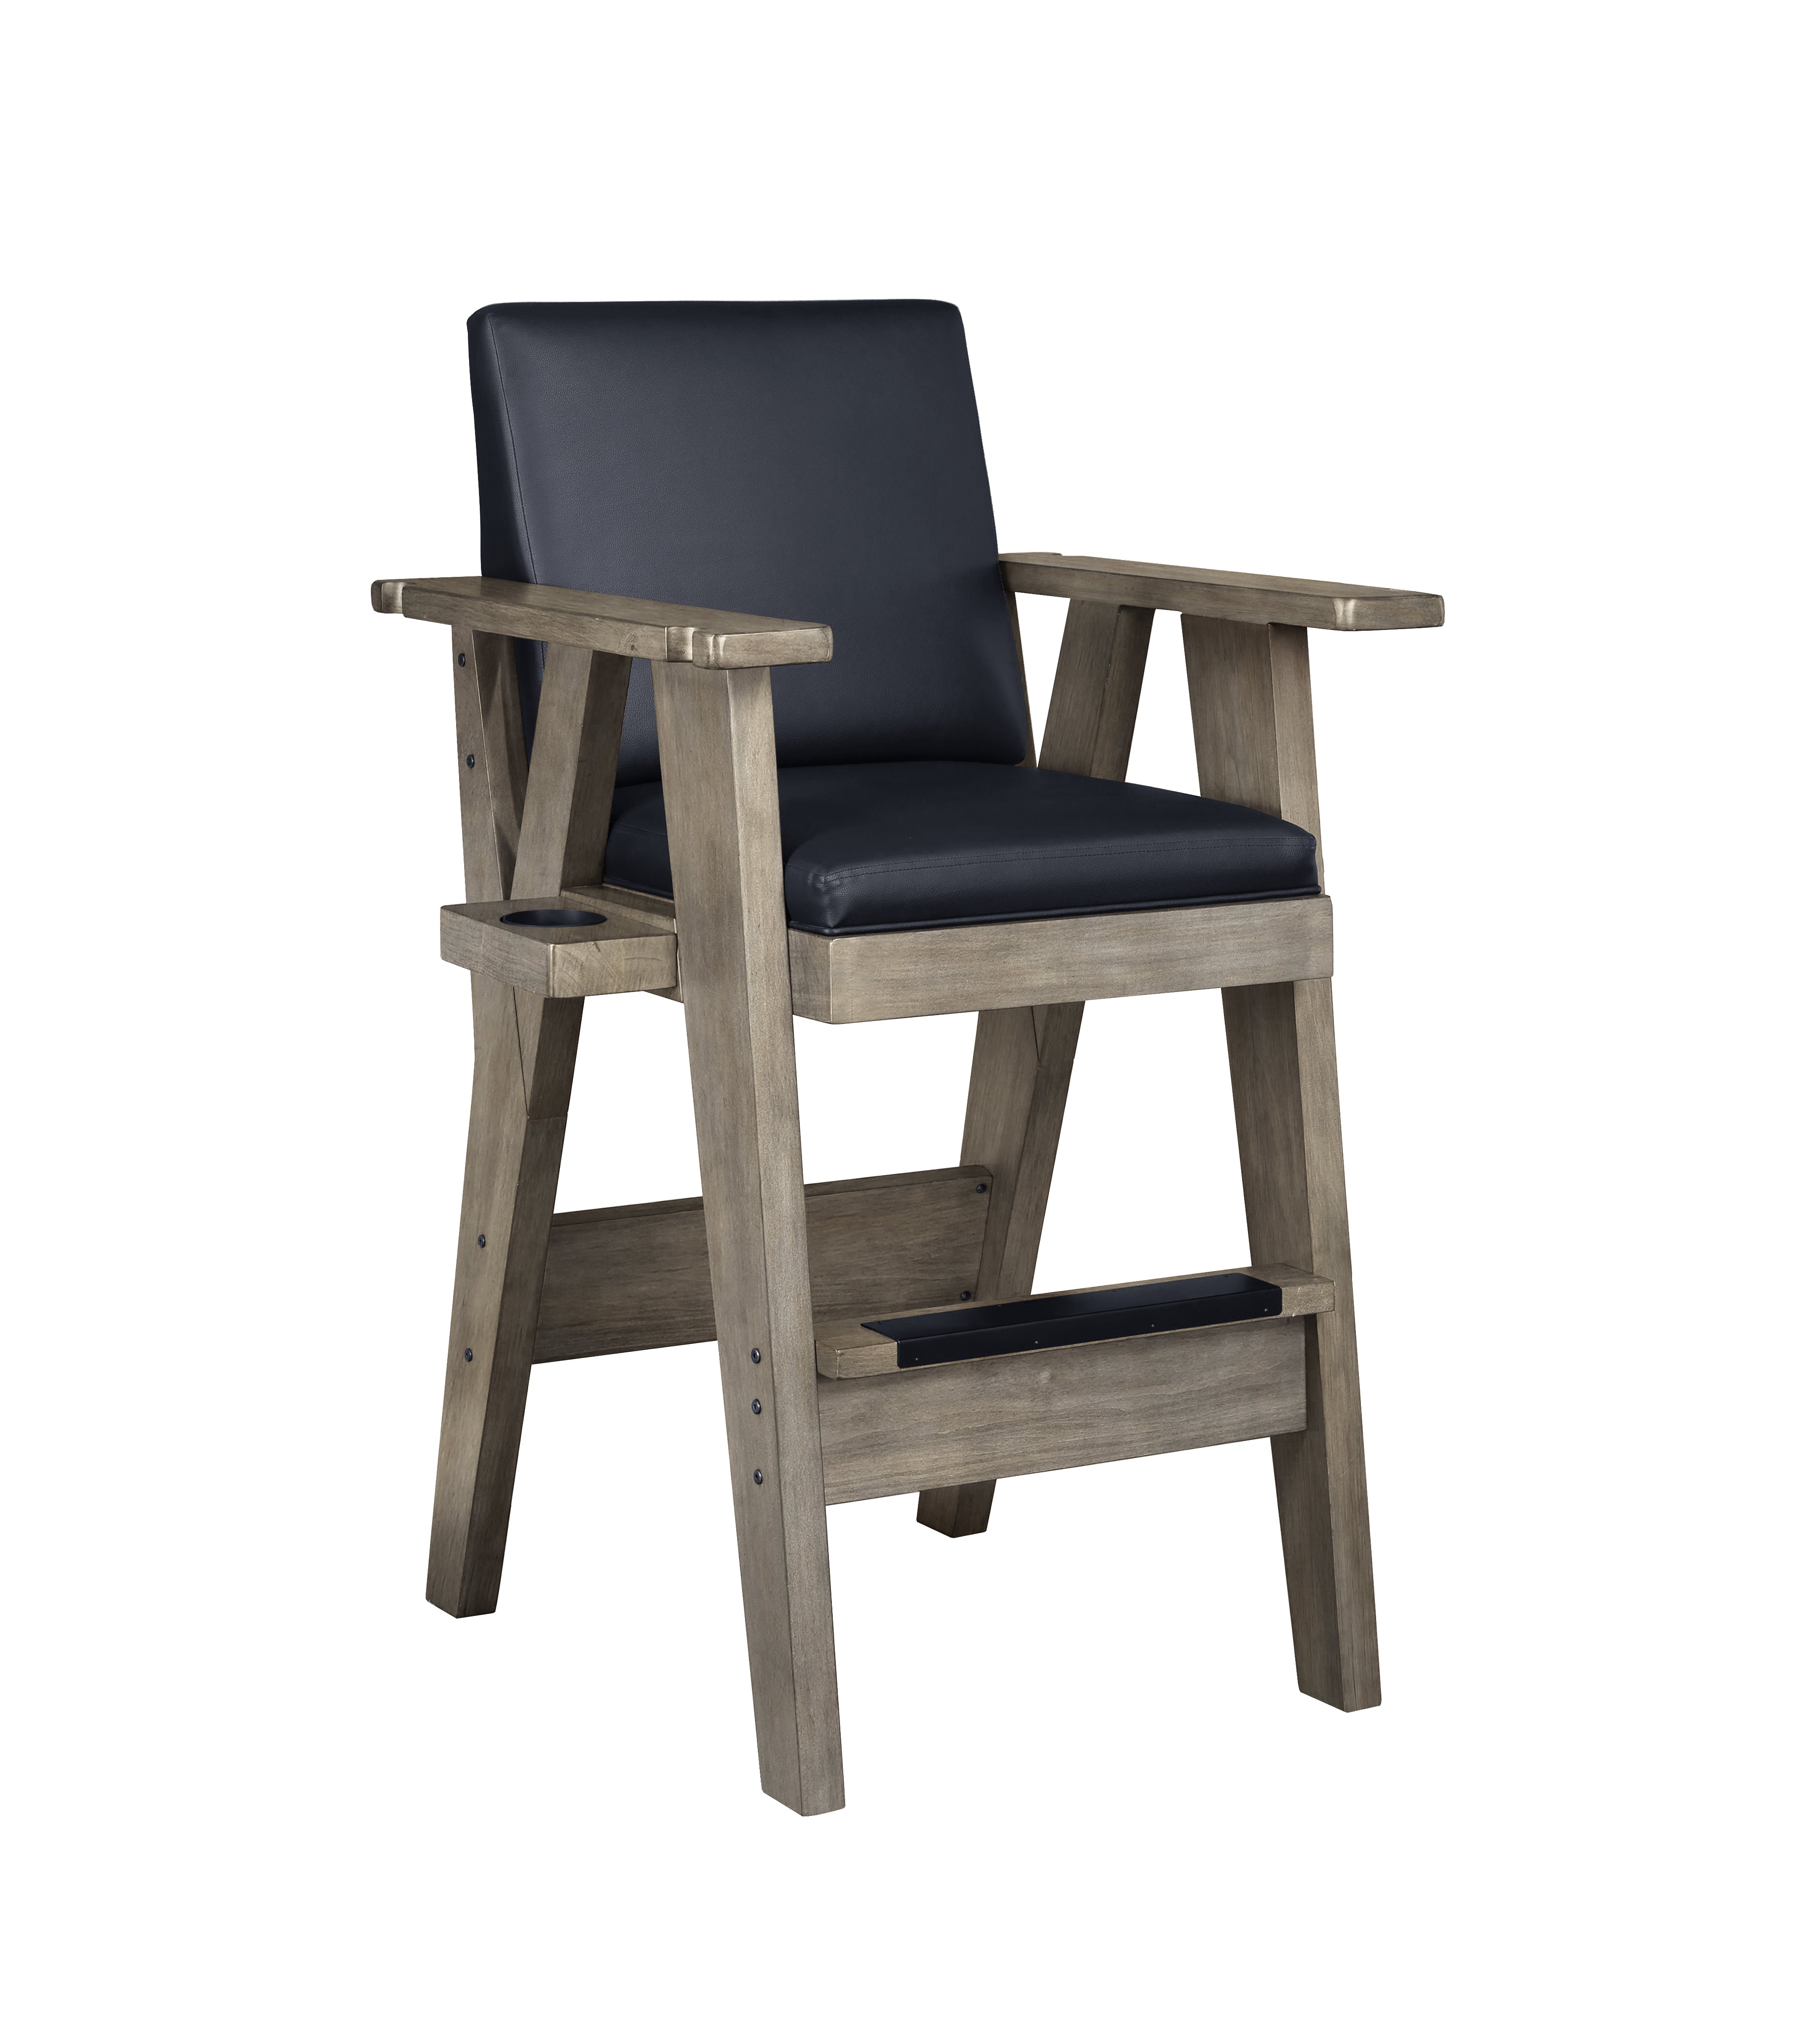 Legacy Billiards Sterling Spectator Chair in Overcast Finish